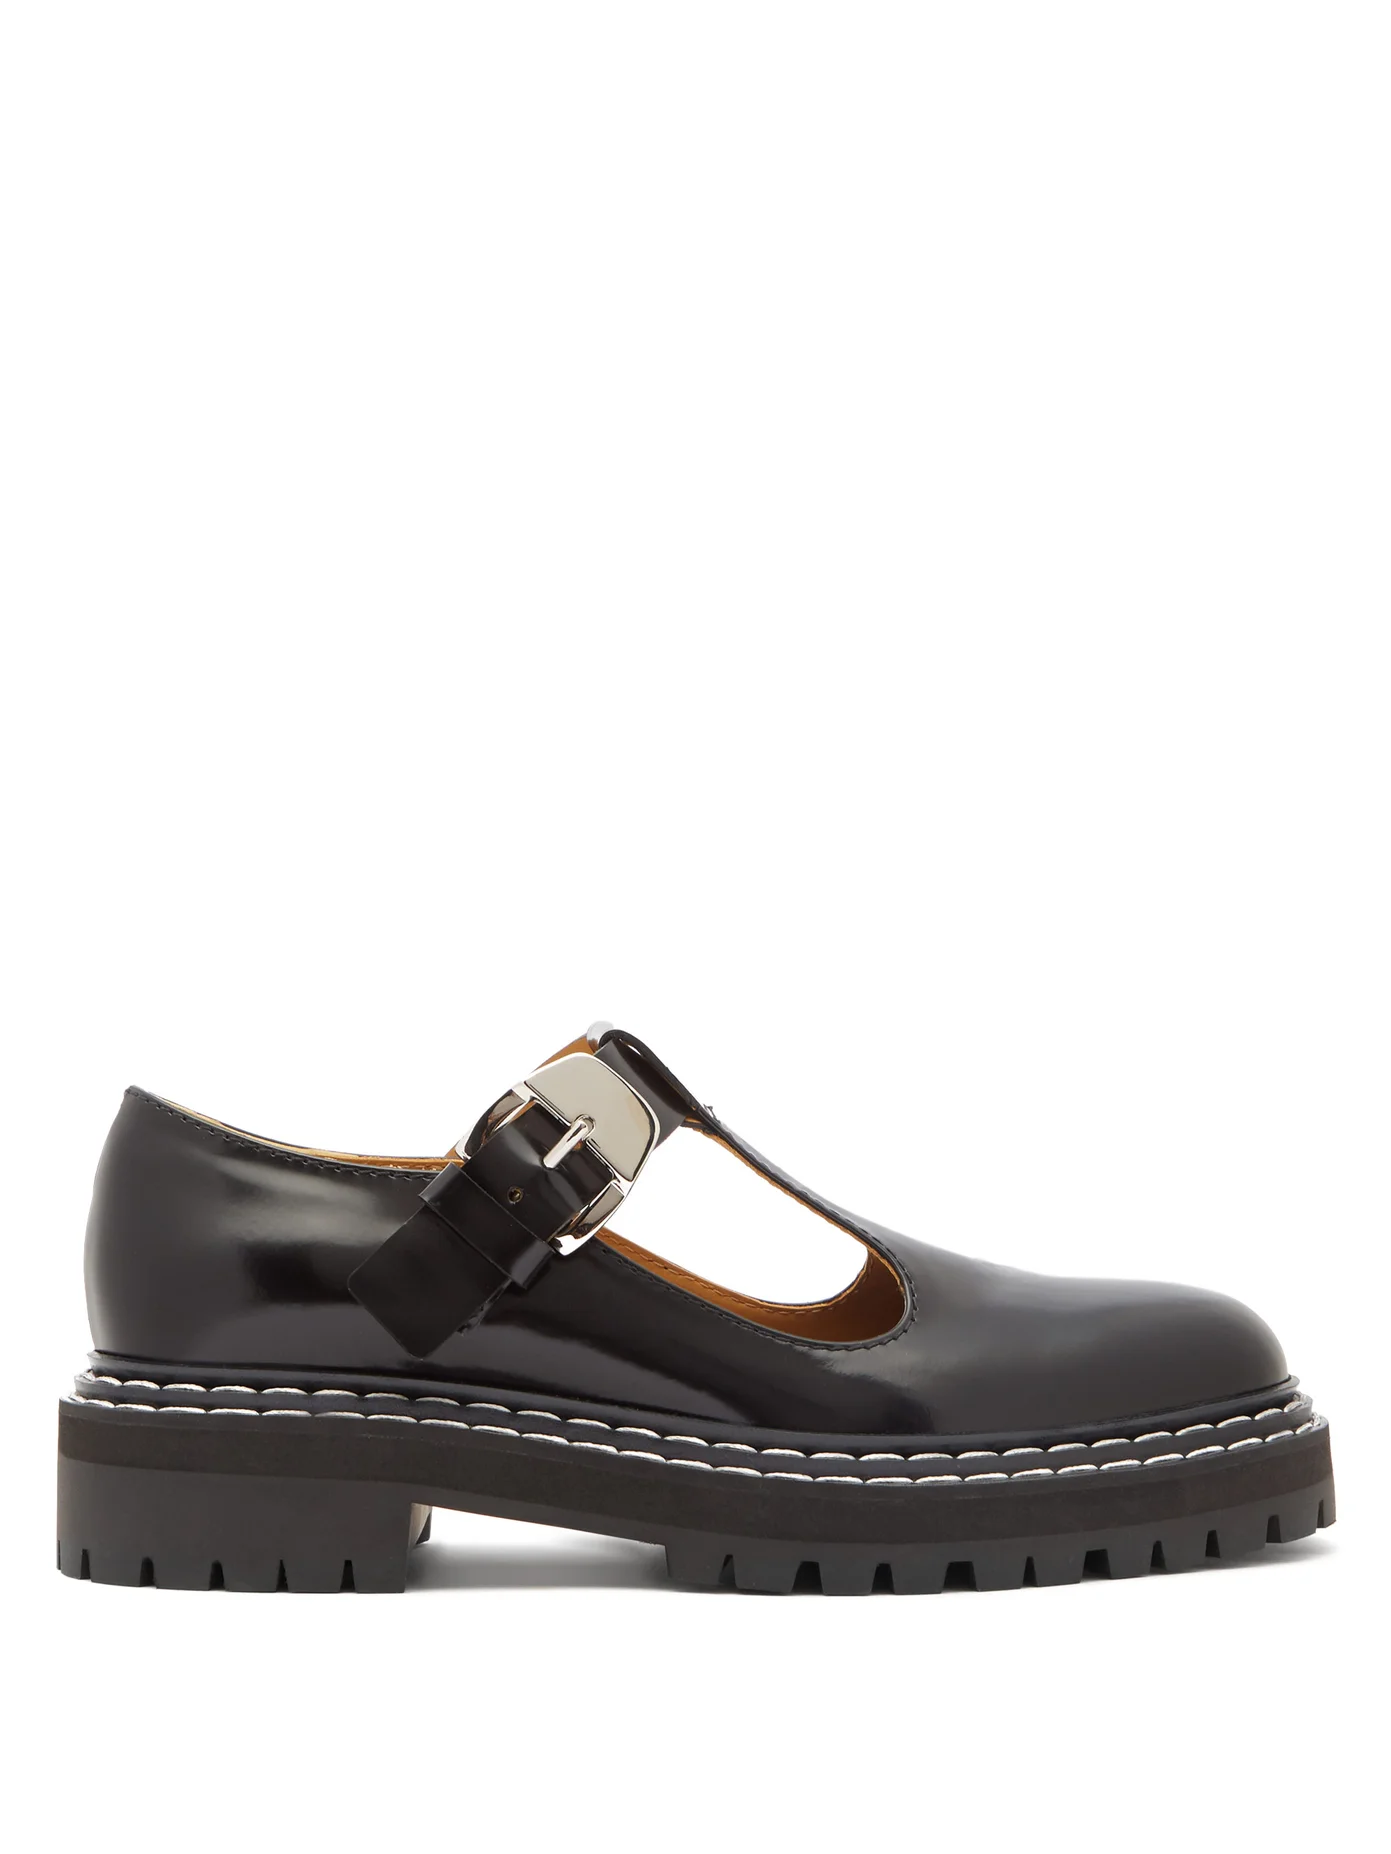 Proenza Schouler + Patent-Leather Mary-Jane Loafers